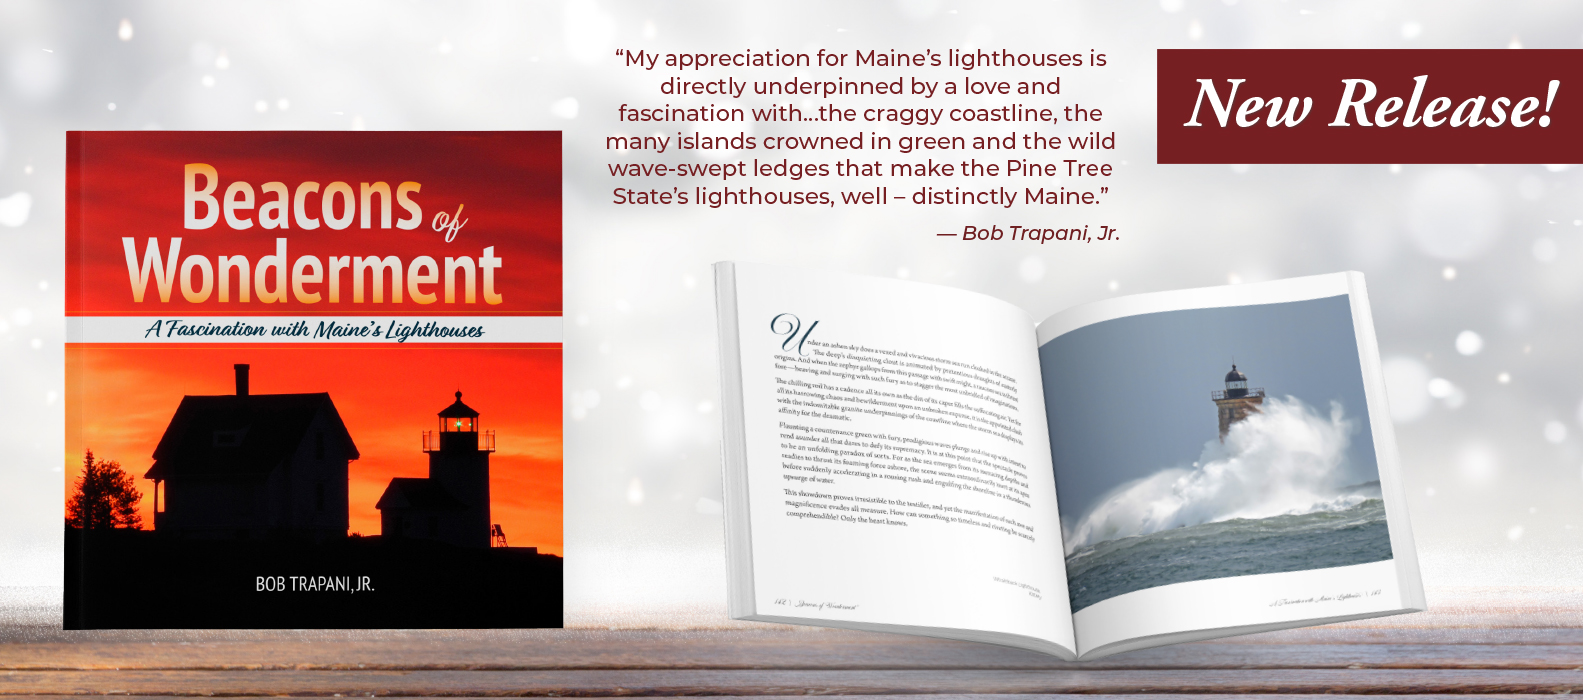 Beacons of Wonderment: A Fascination with Maine's Lighthouses by Bob Trapani, Jr.